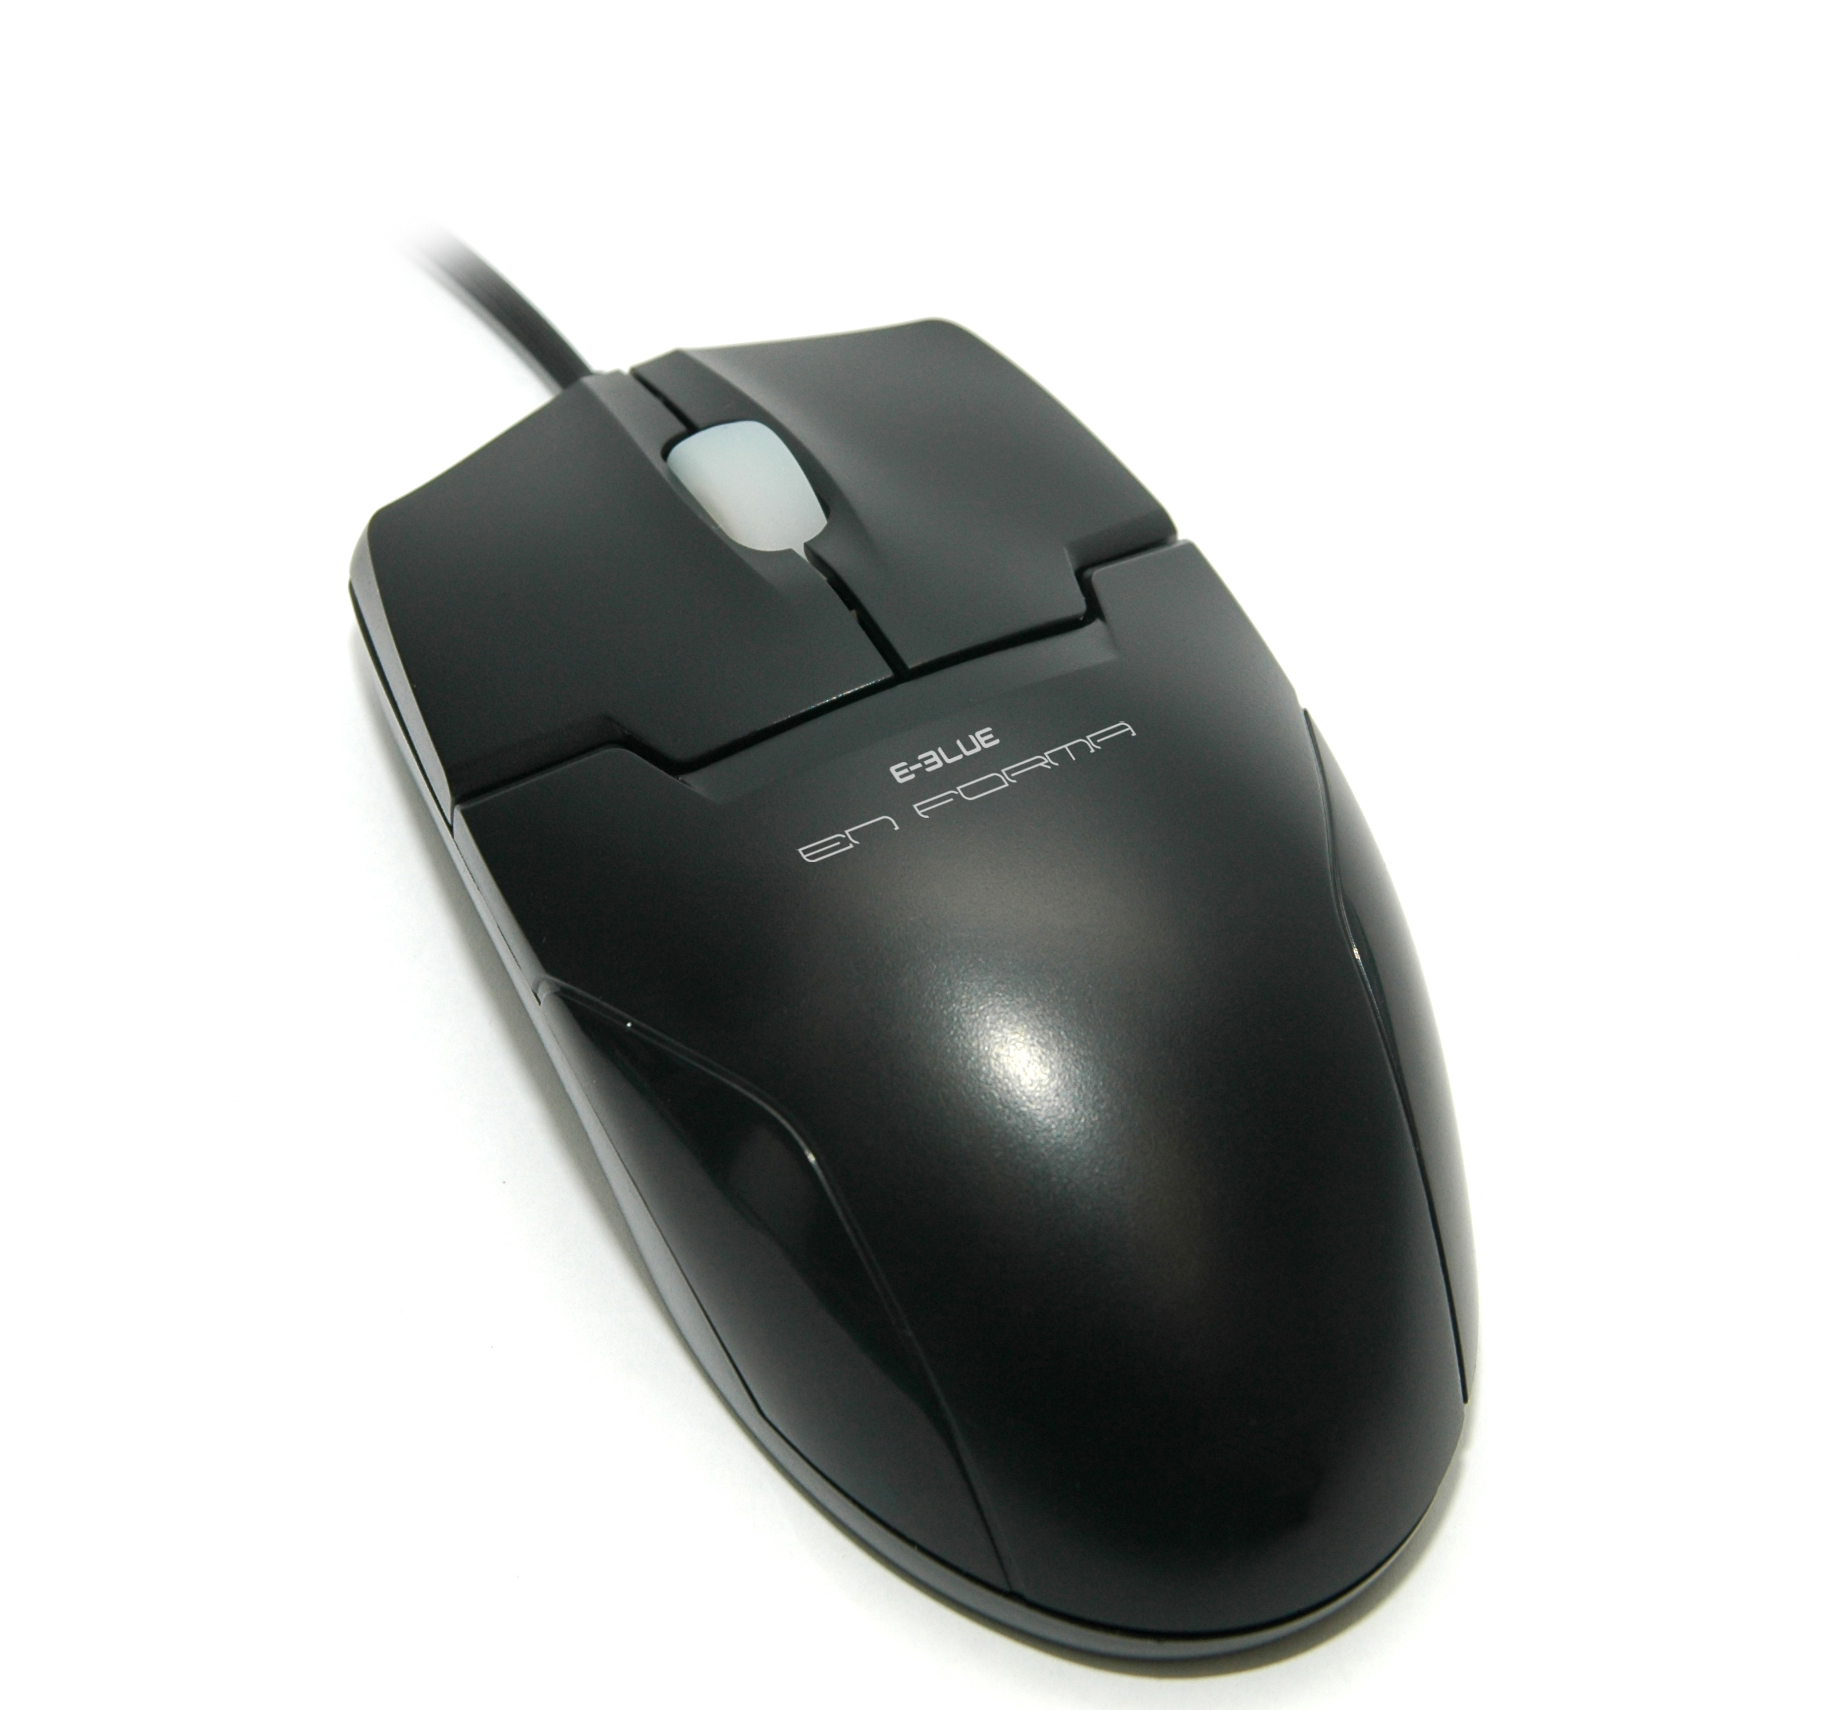 Enformer Wired optical mouse